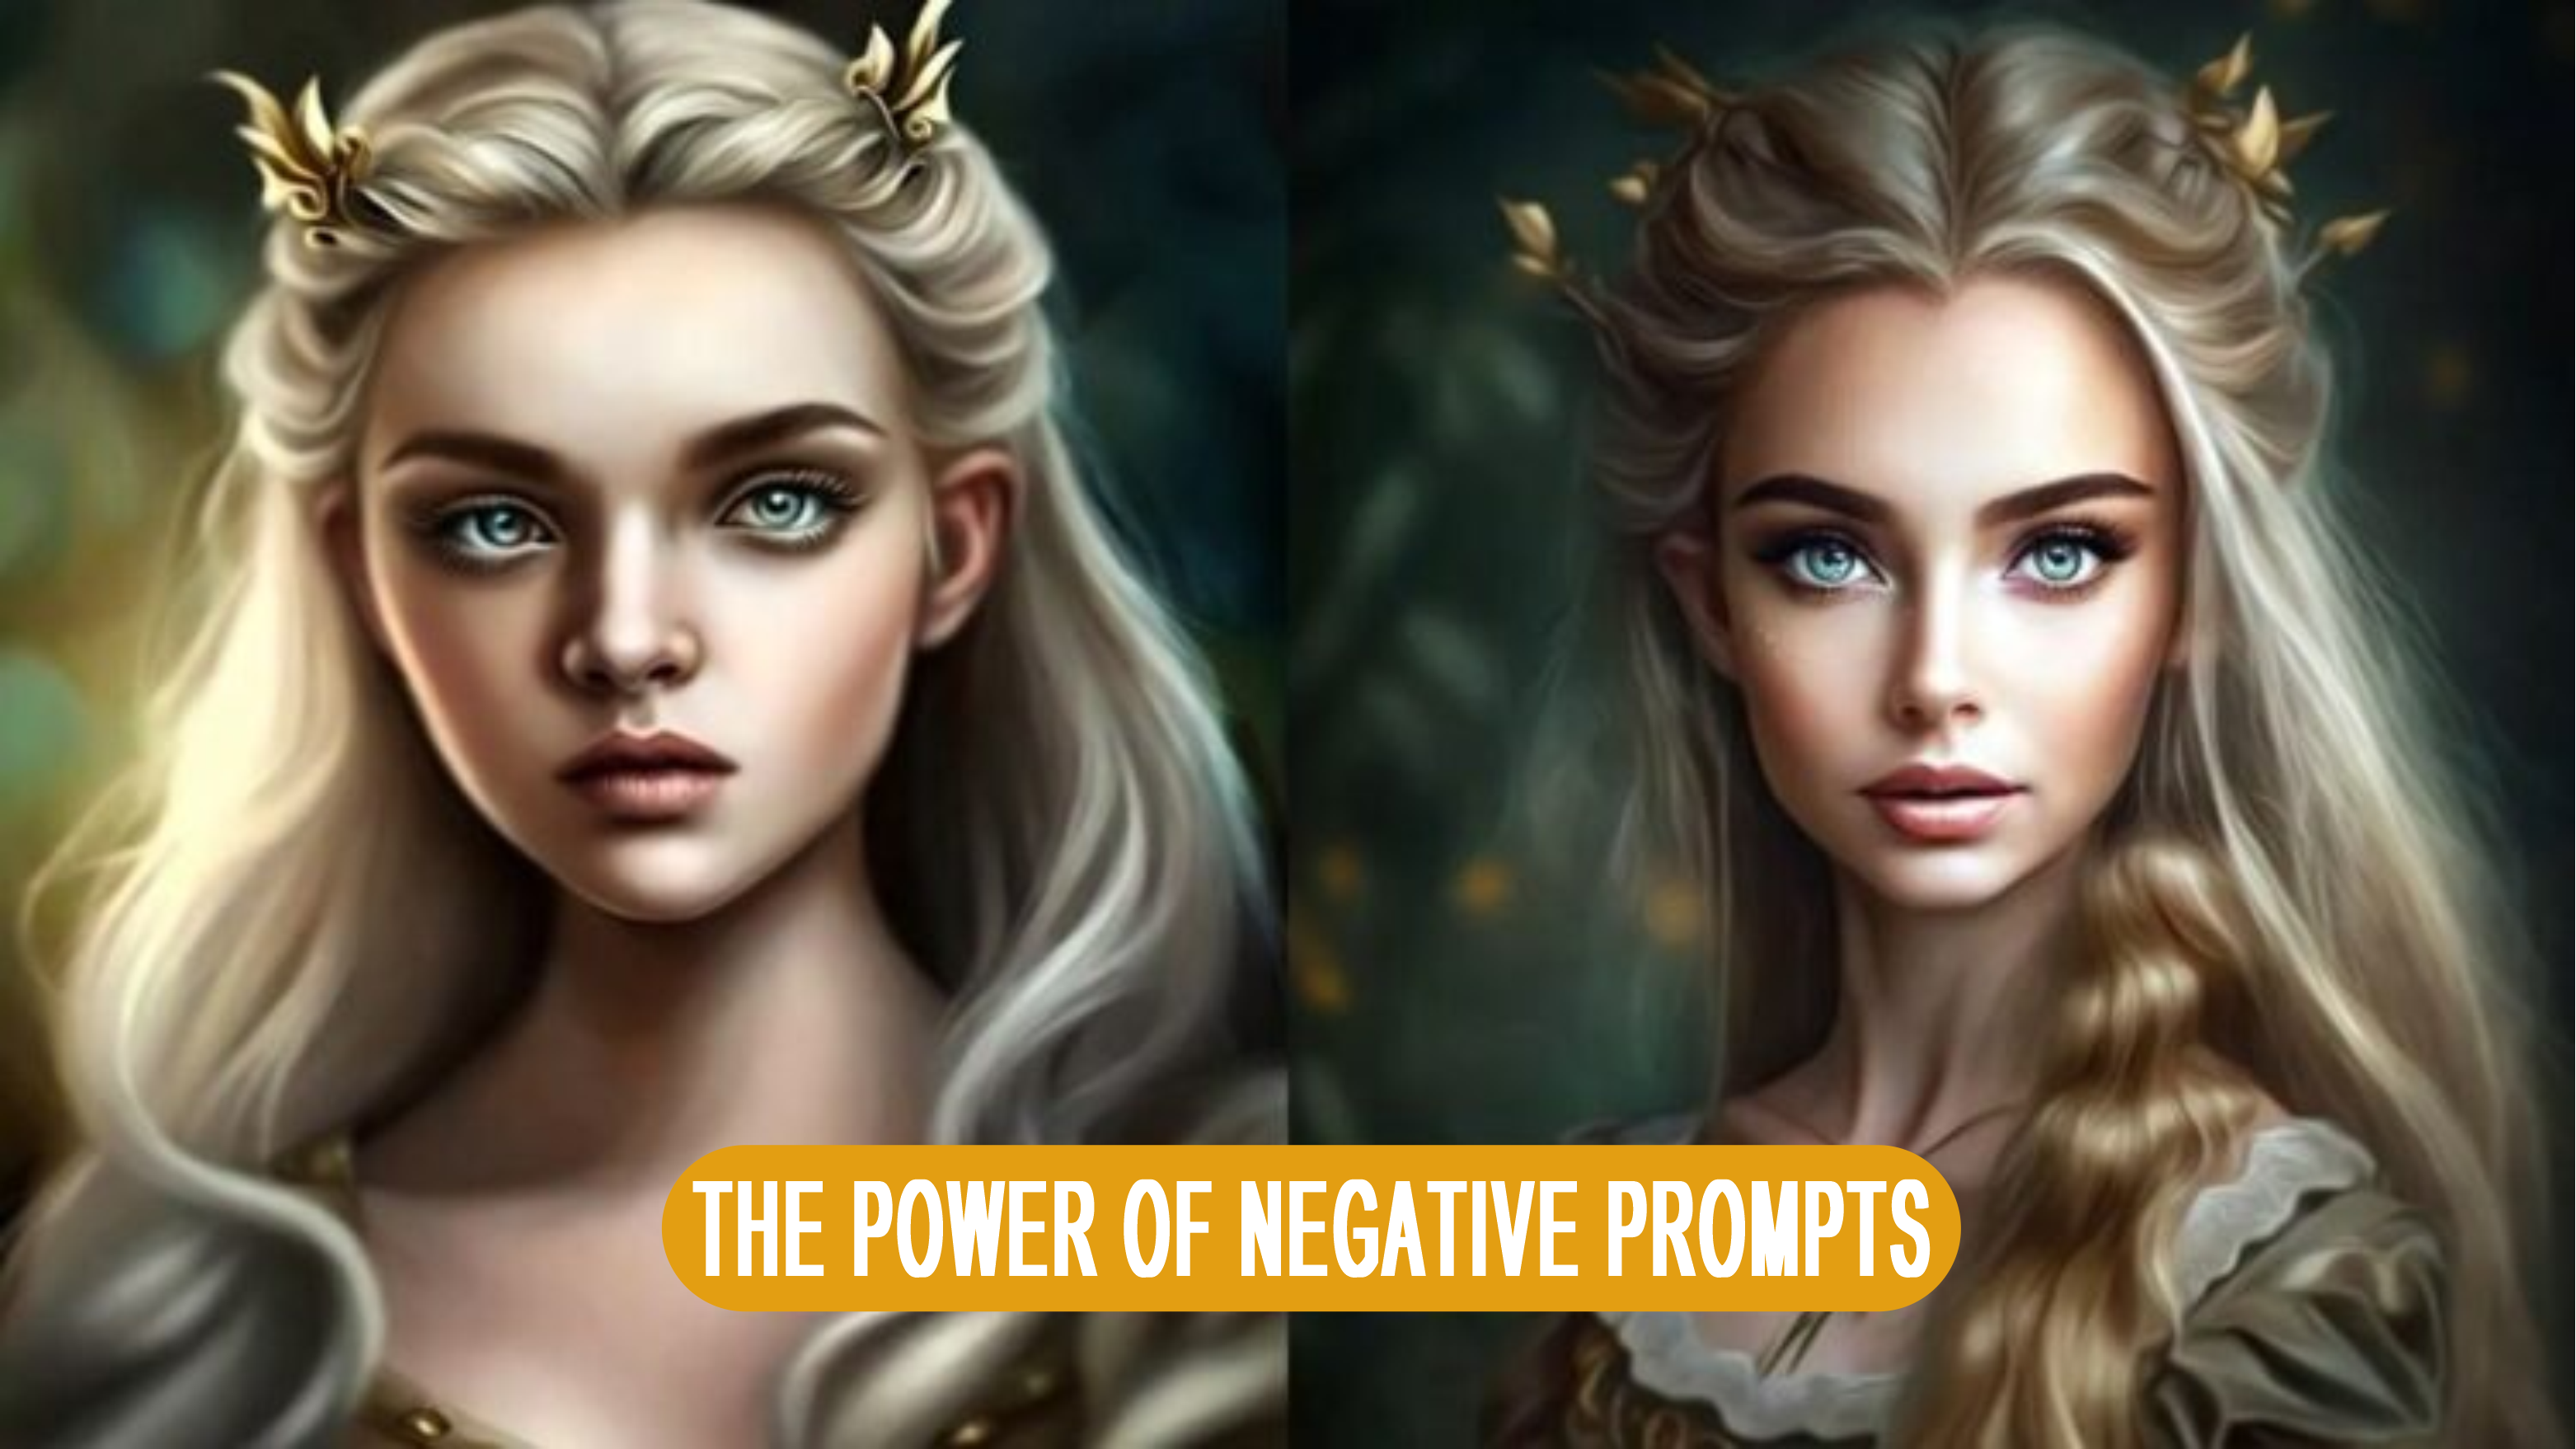 The Power of Negative Prompts